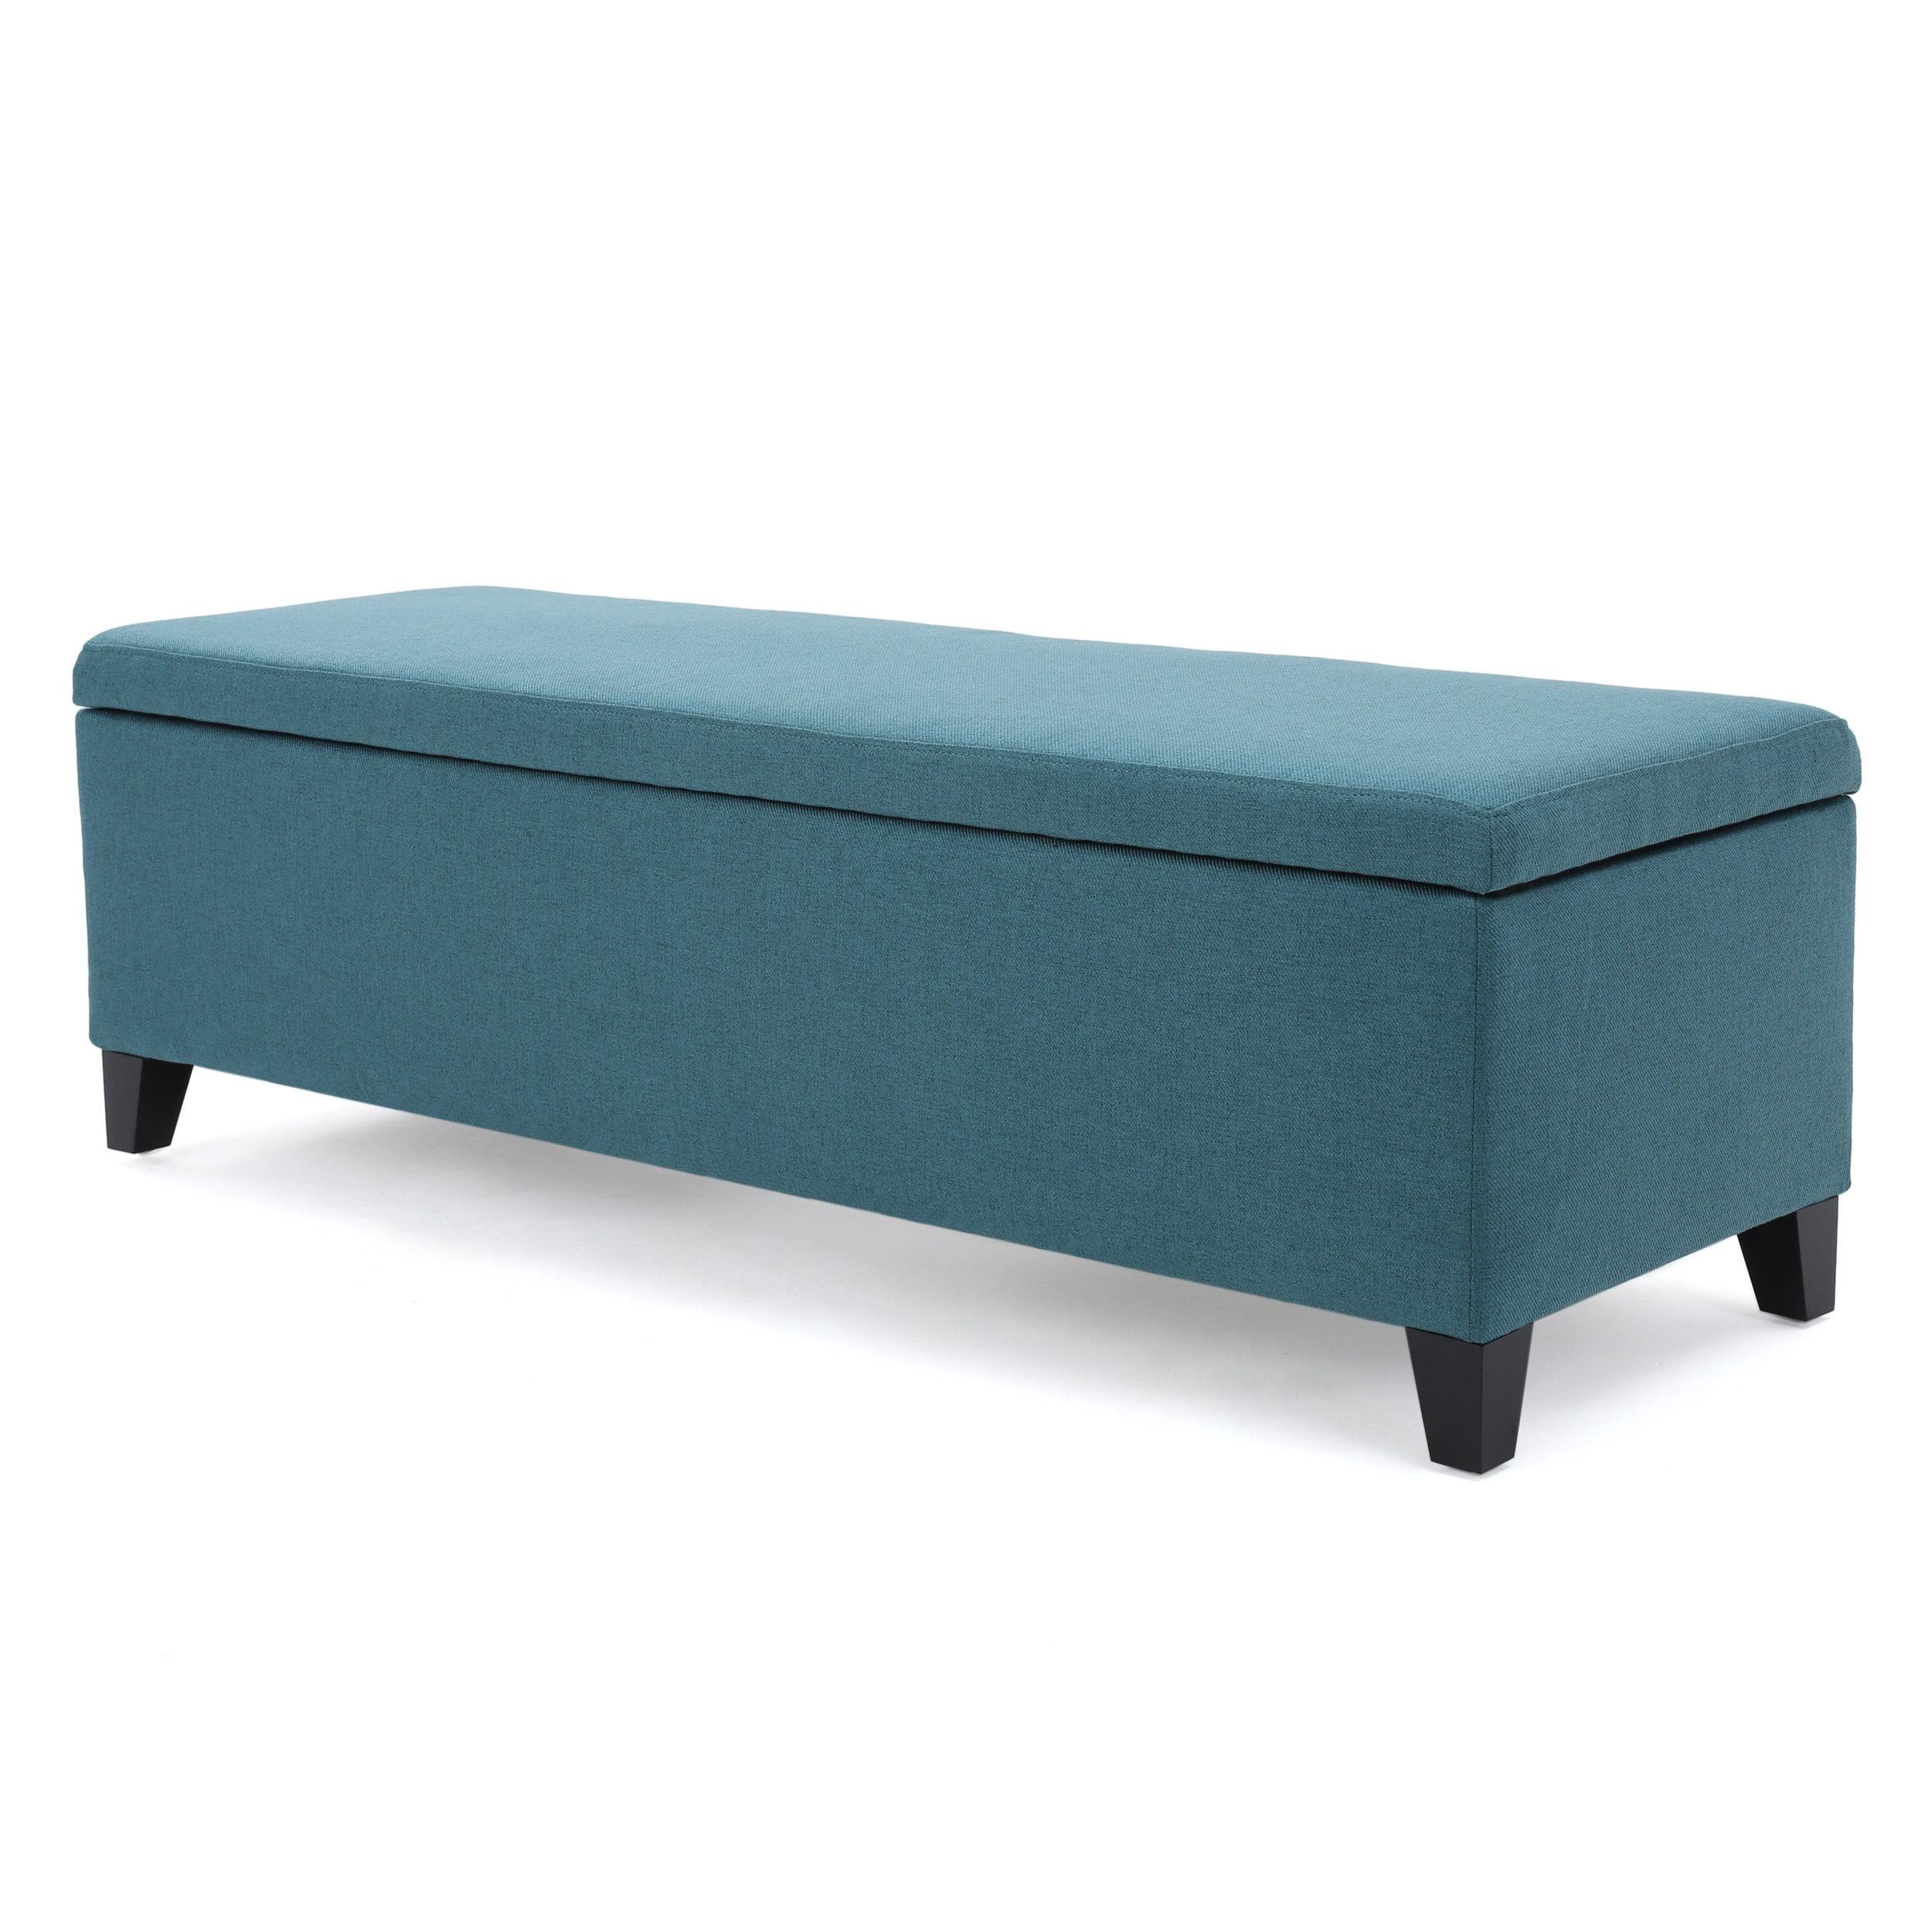 Teal Fabric Storage Ottoman with Easy Access Lid